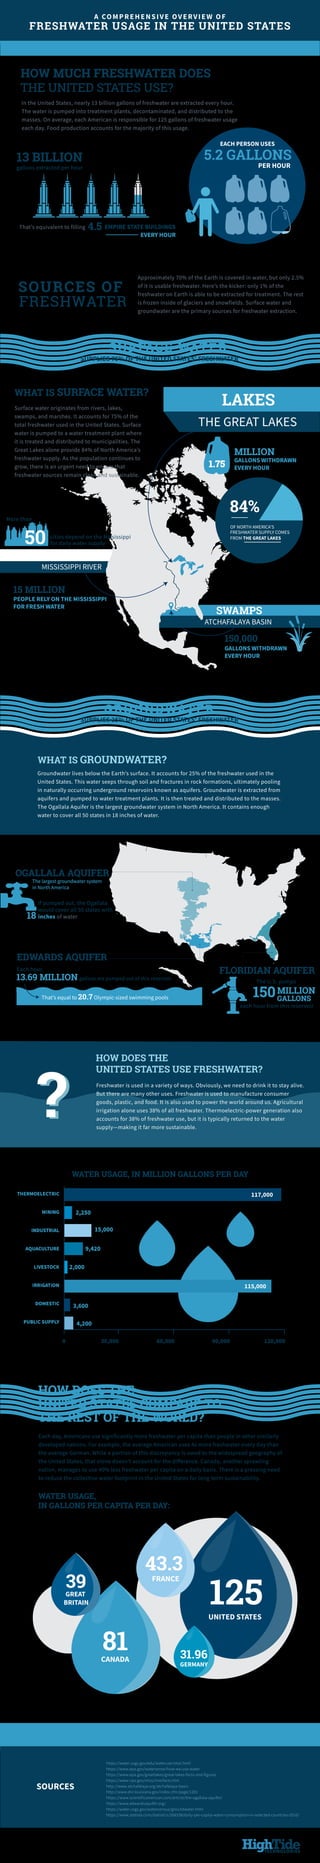 MILLION
HOW MUCH FRESHWATER DOES
THE UNITED STATES USE?
13 BILLION
gallons extracted per hour
That’s equivalent to filling EMPIRE STATE BUILDINGS4.5
EVERY HOUR
RIVERS
SWAMPS
MISSISSIPPI RIVER
ATCHAFALAYA BASIN
15 MILLION
PEOPLE RELY ON THE MISSISSIPPI
FOR FRESH WATER
More than
cities depend on the Mississippi
for daily water supply
84%
OF NORTH AMERICA’S
FRESHWATER SUPPLY COMES
FROM THE GREAT LAKES
GALLONS WITHDRAWN
EVERY HOUR
LAKES
THE GREAT LAKES
150,000
GALLONS WITHDRAWN
EVERY HOUR
SURFACE WATER
SUPPLIES 75% OF THE UNITED STATES’ FRESHWATER
GROUNDWATER
SUPPLIES 25% OF THE UNITED STATES’ FRESHWATER
OGALLALA AQUIFER
FLORIDIAN AQUIFER
EDWARDS AQUIFER
If pumped out, the Ogallala
would cover all 50 states with
inches of water18
The largest groundwater system
in North America
13.69 MILLION
Each hour,
gallons are pumped out of this reservoir
That’s equal to 20.7 Olympic-sized swimming pools
The U.S. pumps
150MILLION
GALLONS
each hour from this reservoir
HOW DOES THE
UNITED STATES COMPARE TO
THE REST OF THE WORLD?
50
In the United States, nearly 13 billion gallons of freshwater are extracted every hour.
The water is pumped into treatment plants, decontaminated, and distributed to the
masses. On average, each American is responsible for 125 gallons of freshwater usage
each day. Food production accounts for the majority of this usage.
SOURCES OF
FRESHWATER
Approximately 70% of the Earth is covered in water, but only 2.5%
of it is usable freshwater. Here’s the kicker: only 1% of the
freshwater on Earth is able to be extracted for treatment. The rest
is frozen inside of glaciers and snowfields. Surface water and
groundwater are the primary sources for freshwater extraction.
WHAT IS SURFACE WATER?
Surface water originates from rivers, lakes,
swamps, and marshes. It accounts for 75% of the
total freshwater used in the United States. Surface
water is pumped to a water treatment plant where
it is treated and distributed to municipalities. The
Great Lakes alone provide 84% of North America’s
freshwater supply. As the population continues to
grow, there is an urgent need to ensure that
freshwater sources remain clean and sustainable.
Groundwater lives below the Earth’s surface. It accounts for 25% of the freshwater used in the
United States. This water seeps through soil and fractures in rock formations, ultimately pooling
in naturally occurring underground reservoirs known as aquifers. Groundwater is extracted from
aquifers and pumped to water treatment plants. It is then treated and distributed to the masses.
The Ogallala Aquifer is the largest groundwater system in North America. It contains enough
water to cover all 50 states in 18 inches of water.
A COMPREHENSIVE OVERVIEW OF
FRESHWATER USAGE IN THE UNITED STATES
Each day, Americans use significantly more freshwater per capita than people in other similarly
developed nations. For example, the average American uses 4x more freshwater every day than
the average German. While a portion of this discrepancy is owed to the widespread geography of
the United States, that alone doesn’t account for the difference. Canada, another sprawling
nation, manages to use 40% less freshwater per capita on a daily basis. There is a pressing need
to reduce the collective water footprint in the United States for long-term sustainability.
WATER USAGE, IN MILLION GALLONS PER DAY
WATER USAGE,
IN GALLONS PER CAPITA PER DAY:
125UNITED STATES
81CANADA
43.3
FRANCE
39GREAT
BRITAIN
31.96
GERMANY
EACH PERSON USES
5.2 GALLONS
PER HOUR
WHAT IS GROUNDWATER?
THERMOELECTRIC
MINING
INDUSTRIAL
AQUACULTURE
LIVESTOCK
IRRIGATION
DOMESTIC
PUBLIC SUPPLY
117,000
0 30,000 60,000 90,000 120,000
2,250
15,000
9,420
2,000
115,000
3,600
4,200
HOW DOES THE
UNITED STATES USE FRESHWATER?
??
https://water.usgs.gov/edu/wateruse-total.html
https://www.epa.gov/watersense/how-we-use-water
https://www.epa.gov/greatlakes/great-lakes-facts-and-figures
https://www.nps.gov/miss/riverfacts.htm
http://www.atchafalaya.org/atchafalaya-basin
http://www.dnr.louisiana.gov/index.cfm/page/1281
https://www.scientificamerican.com/article/the-ogallala-aquifer/
https://www.edwardsaquifer.org/
https://water.usgs.gov/watercensus/groundwater.html
https://www.statista.com/statistics/268338/daily-per-capita-water-consumption-in-selected-countries-2010/
SOURCES
Freshwater is used in a variety of ways. Obviously, we need to drink it to stay alive.
But there are many other uses. Freshwater is used to manufacture consumer
goods, plastic, and food. It is also used to power the world around us. Agricultural
irrigation alone uses 38% of all freshwater. Thermoelectric-power generation also
accounts for 38% of freshwater use, but it is typically returned to the water
supply—making it far more sustainable.
1.75
 